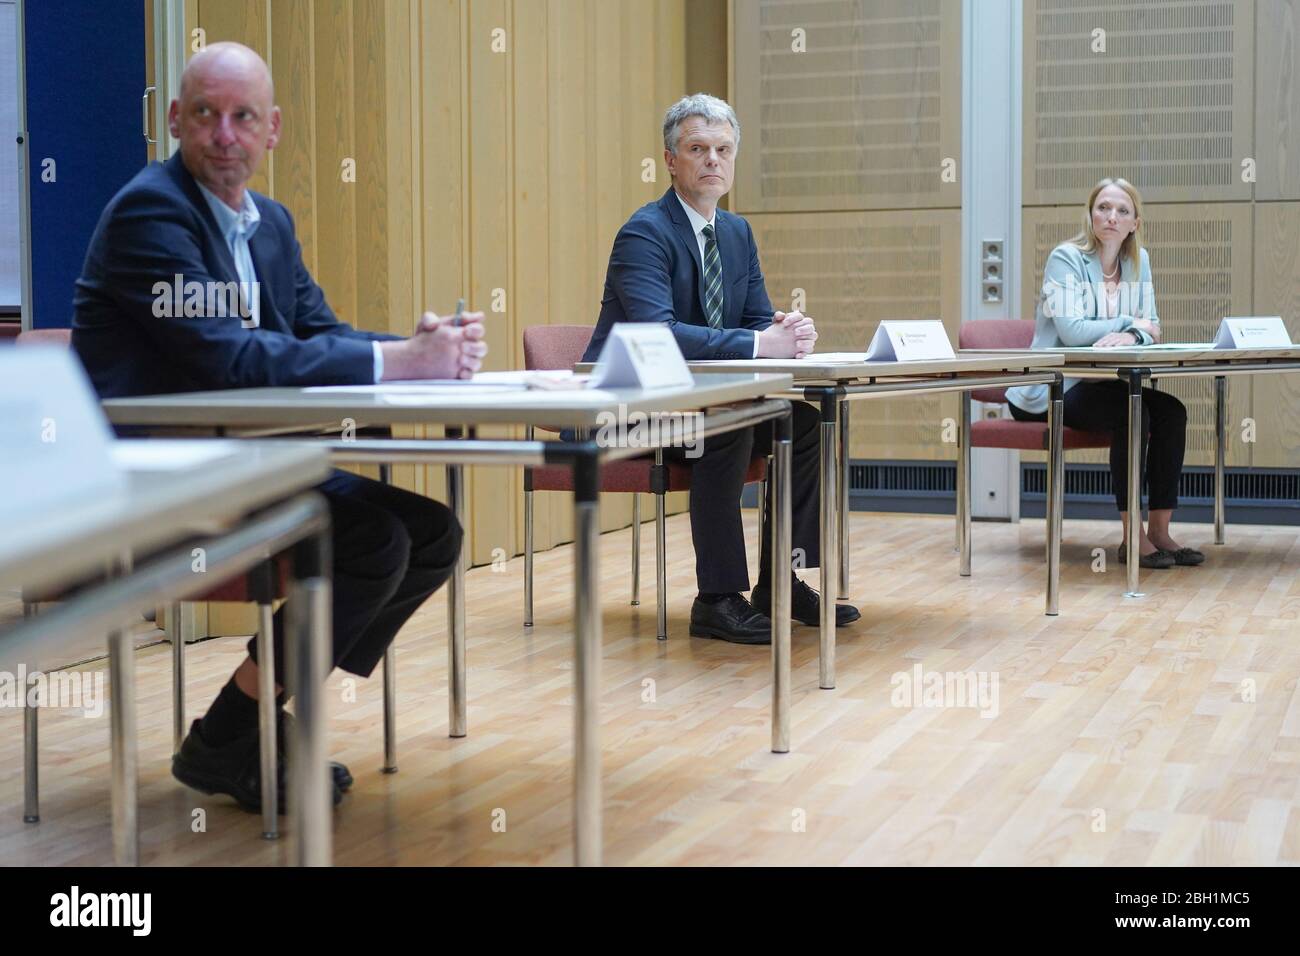 23 April 2020, Berlin: Jochen Sindberg (l-r), Senior Criminal Investigation Director and Head of the Department for Combating White-Collar Crime, Thomas Fels, Senior Public Prosecutor and Head of the Department for Combating Money Laundering, and Nina Thom, Senior Public Prosecutor and Head of the Department for Asset Recovery, are sitting at a press conference of the Berlin Public Prosecutor's Office on the subject of 'Combating fraud in connection with Corona emergency aid'. Photo: Jörg Carstensen/dpa Stock Photo